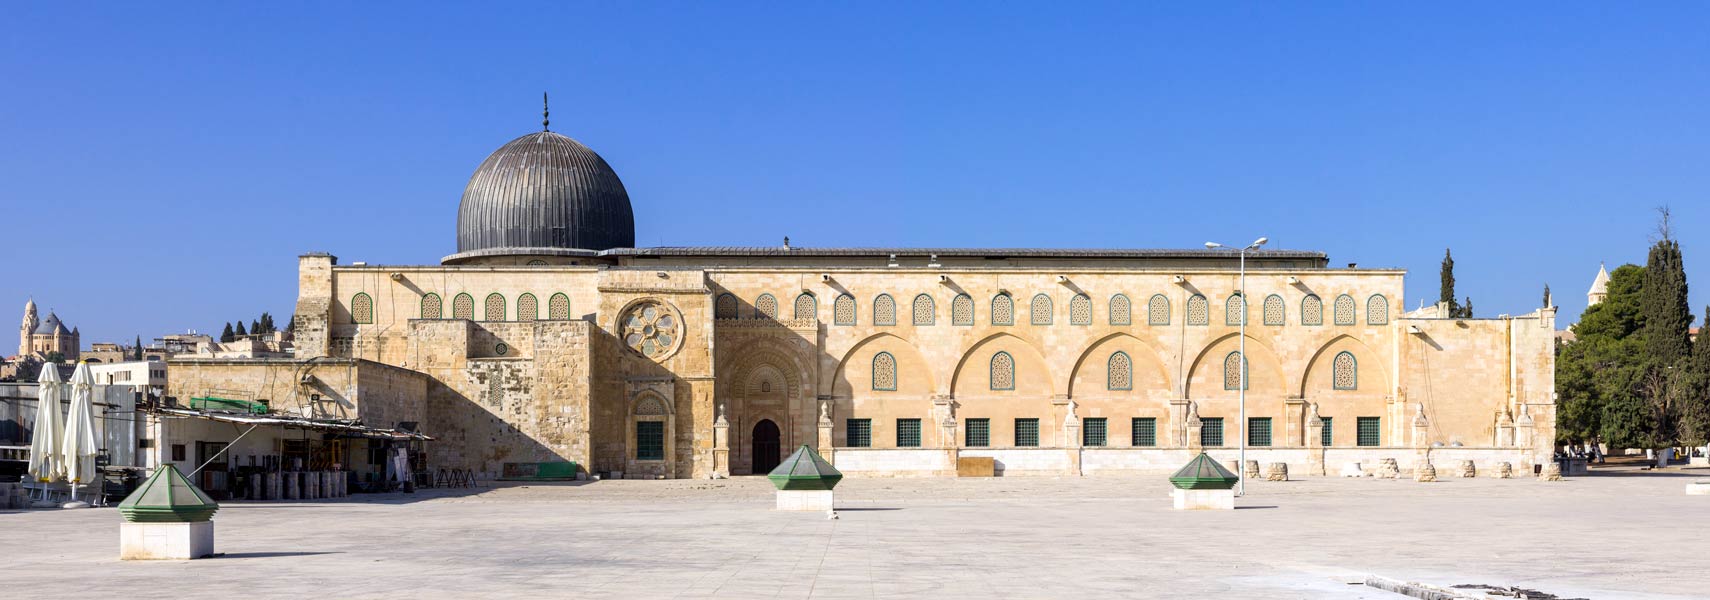 Al-Aqsa Mosque on the Temple Mount in the Old City of East Jerusalem